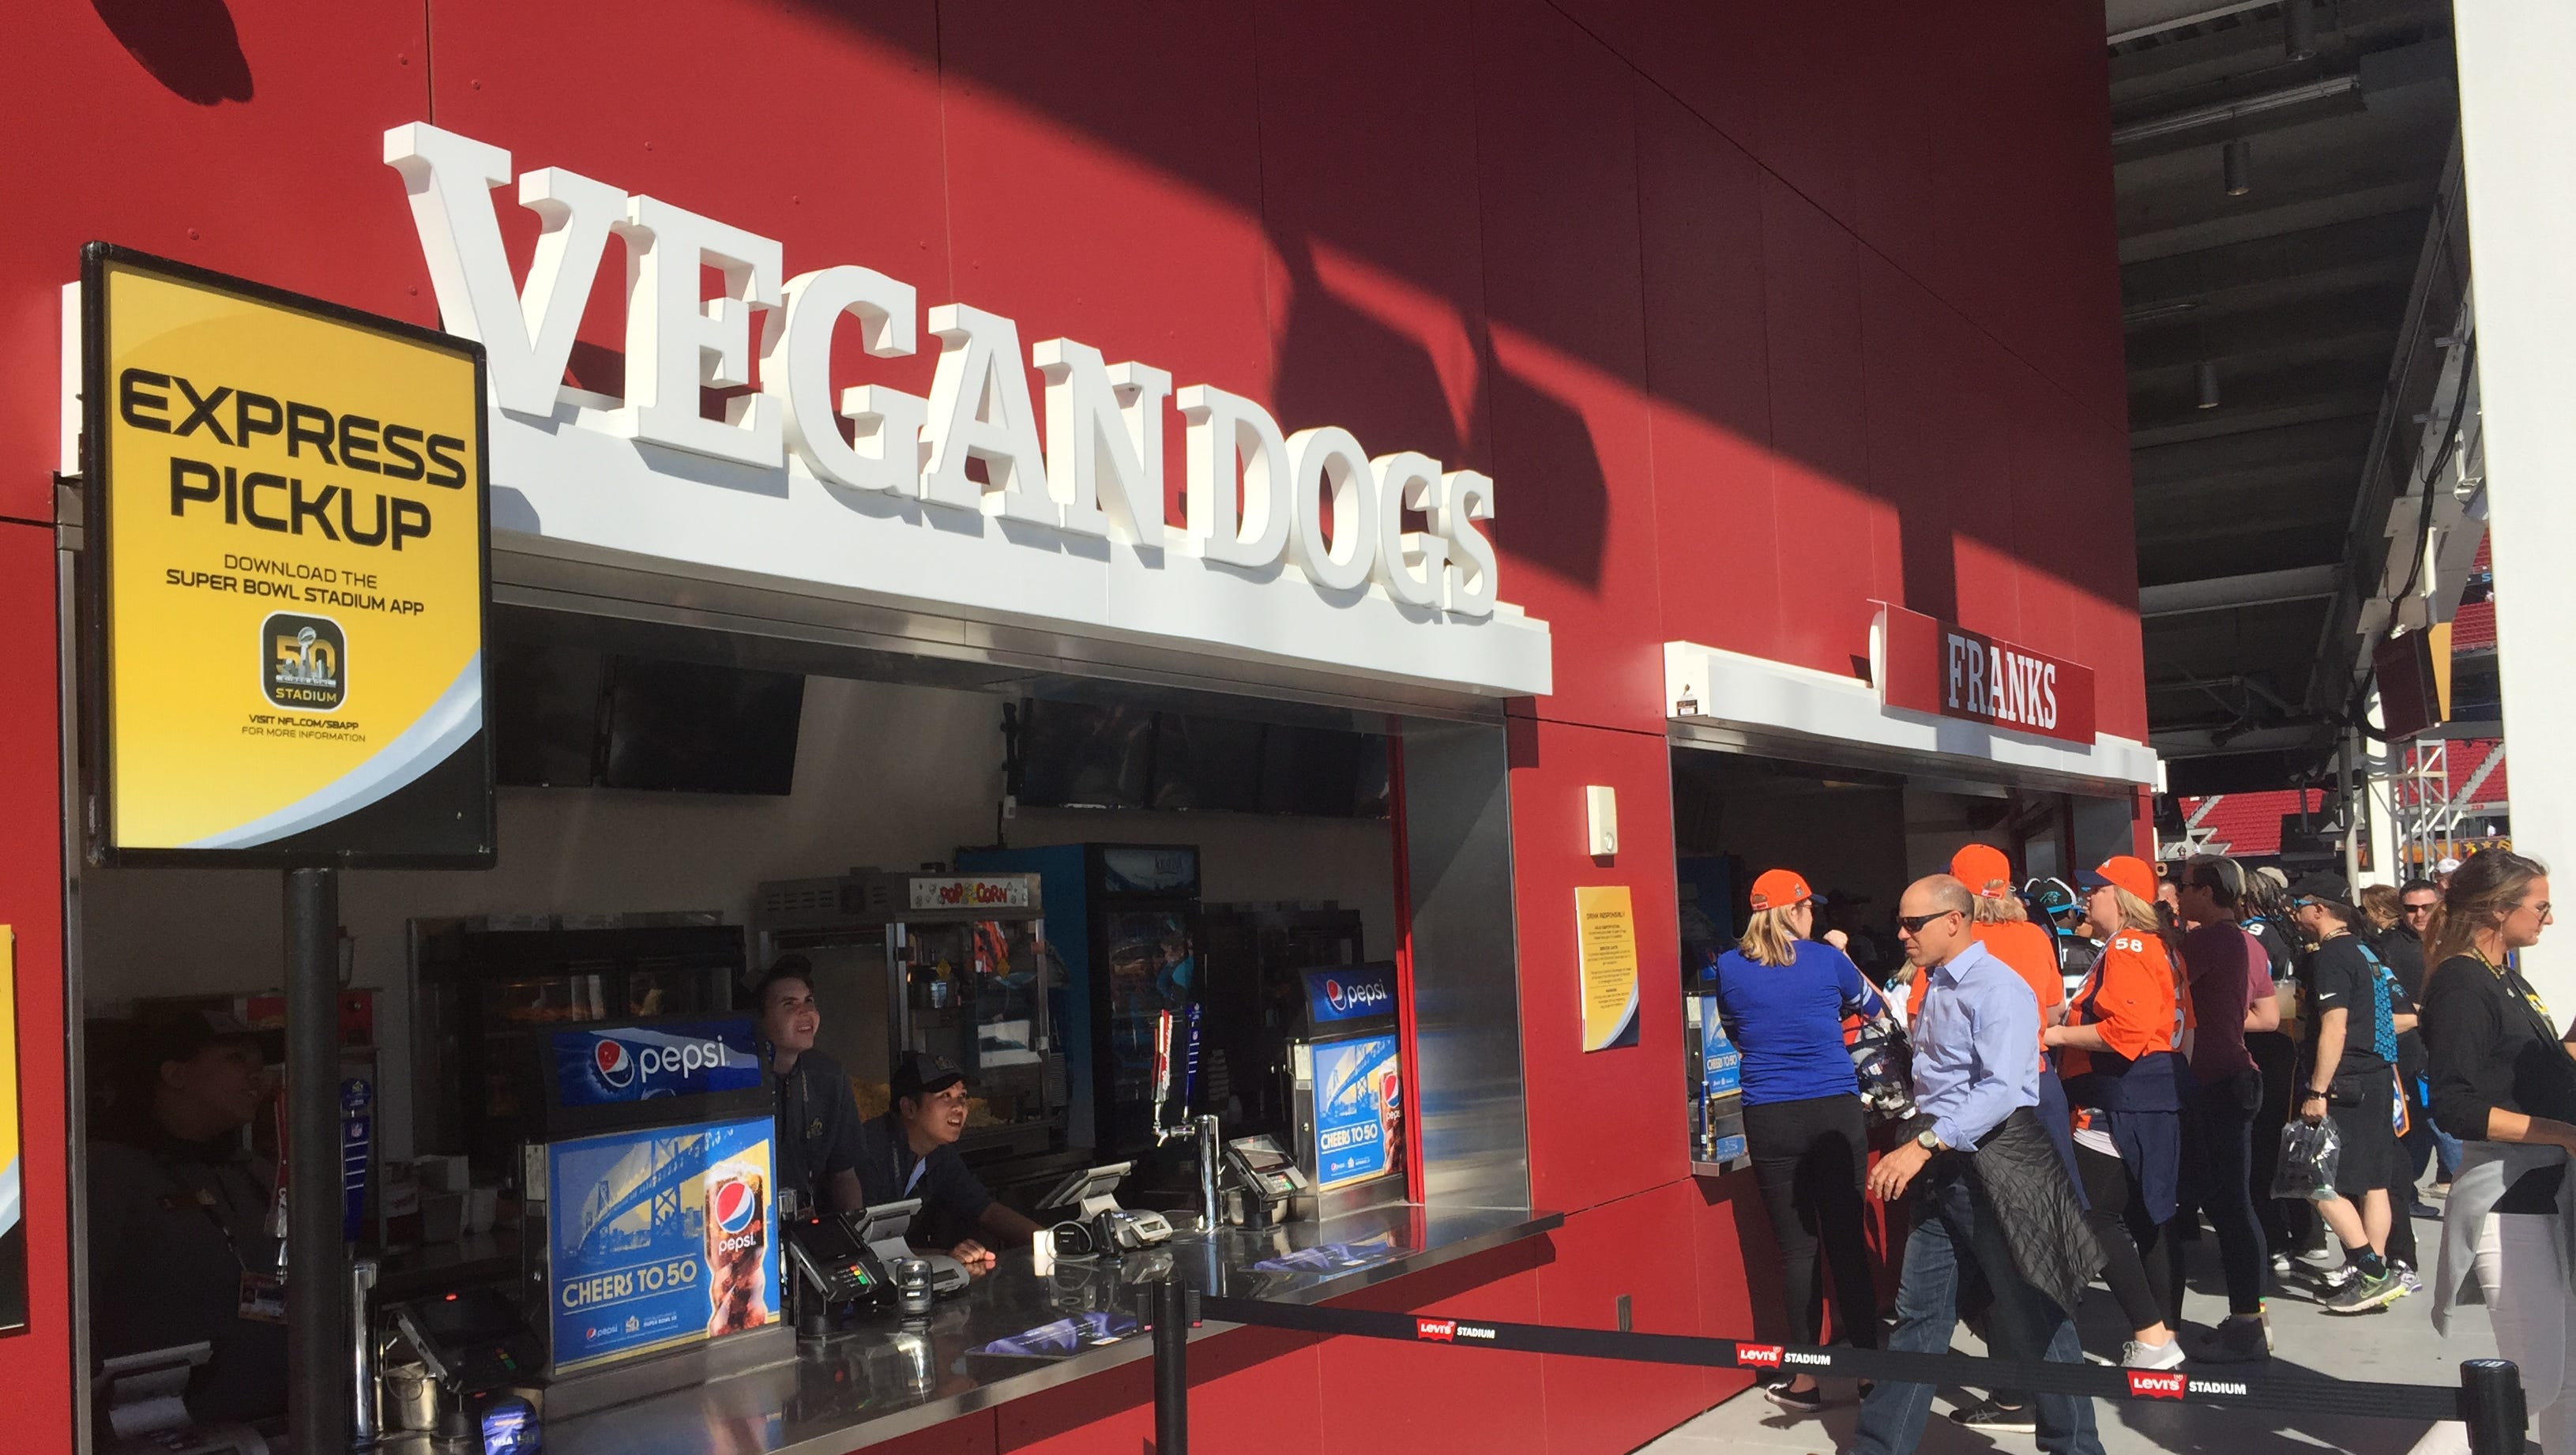 The $8 'Vegan Dog' is the most hated snack at Super Bowl 50